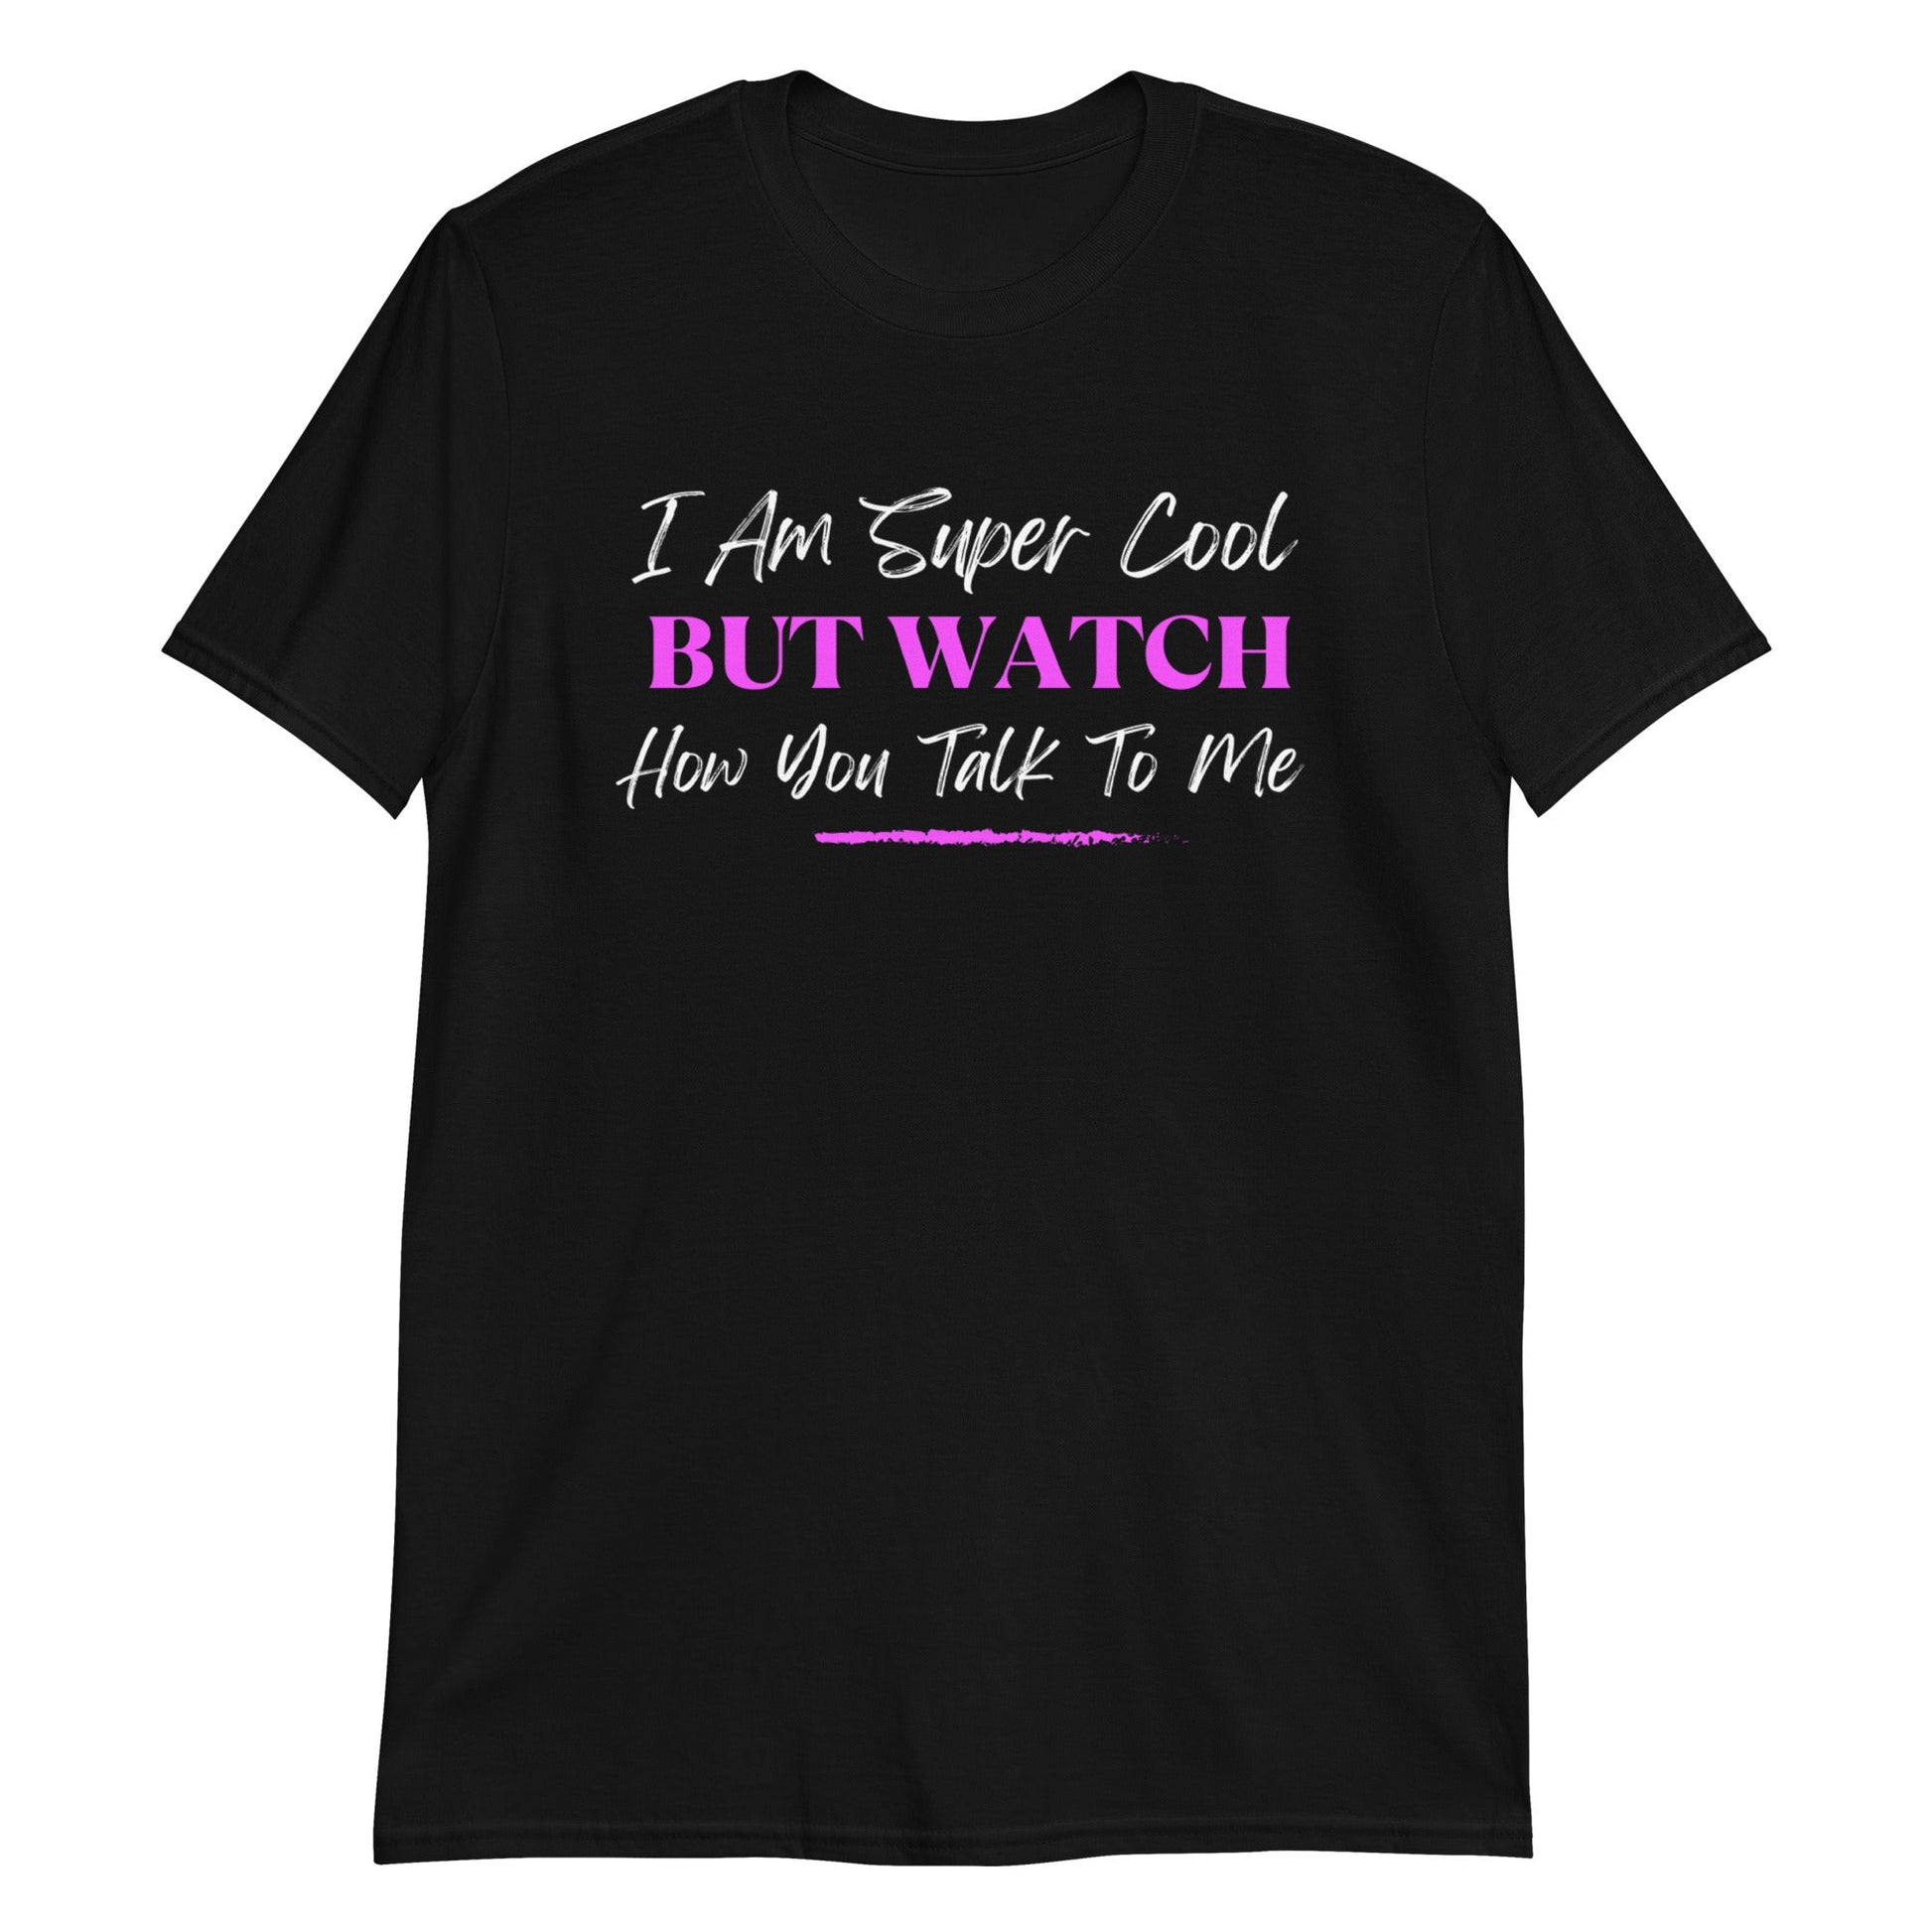 I am Super Cool But Watch How You Talk To Me Short-Sleeve Unisex T-Shirt (For a Slim Fit Order A Size Down) - Catch This Tea Shirts